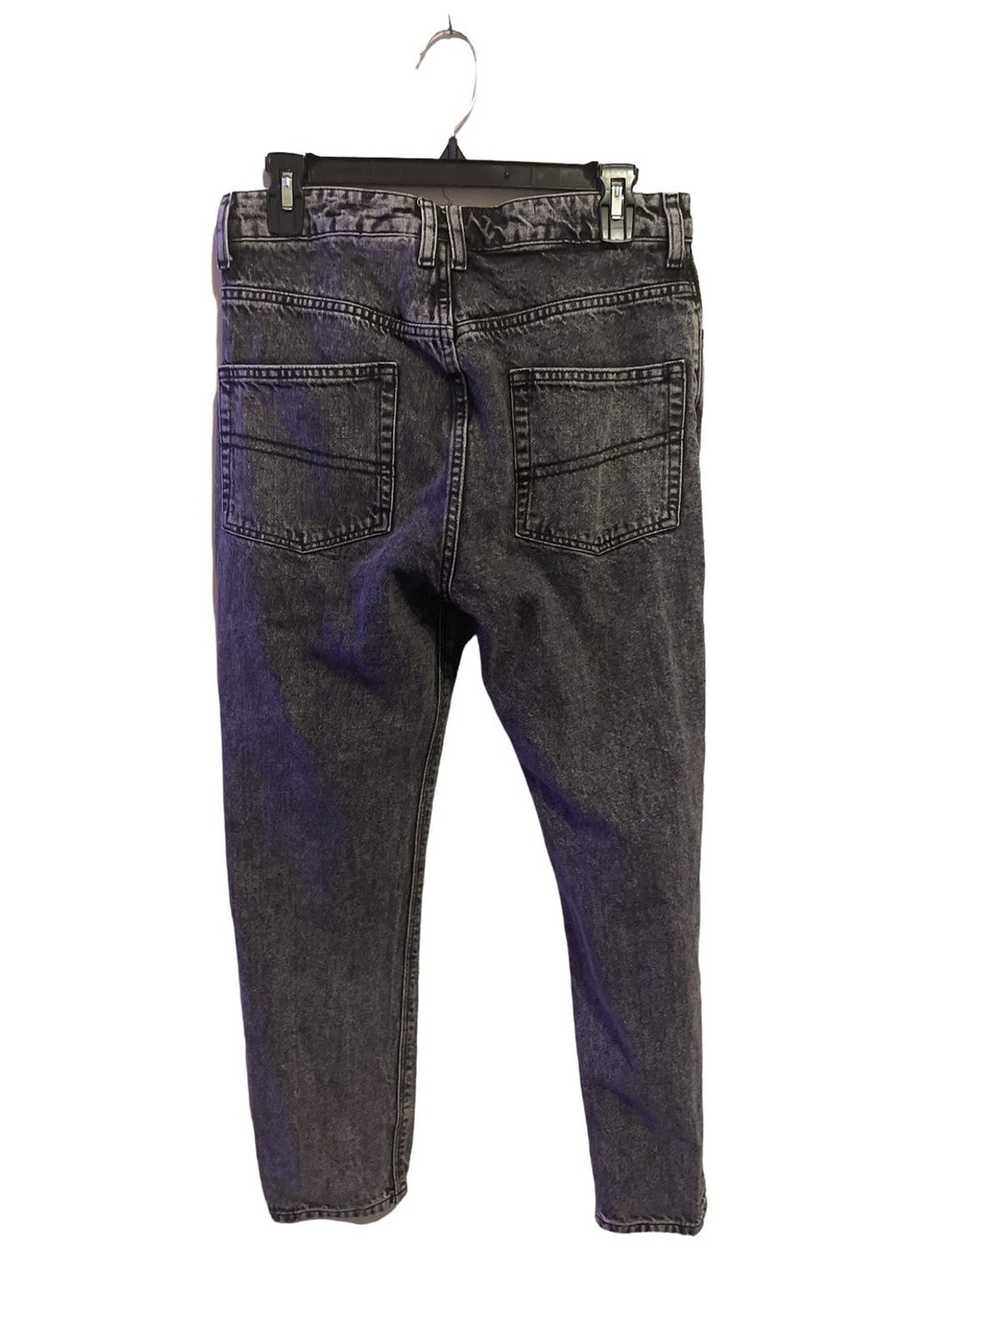 Streetwear tapered jeans - image 2